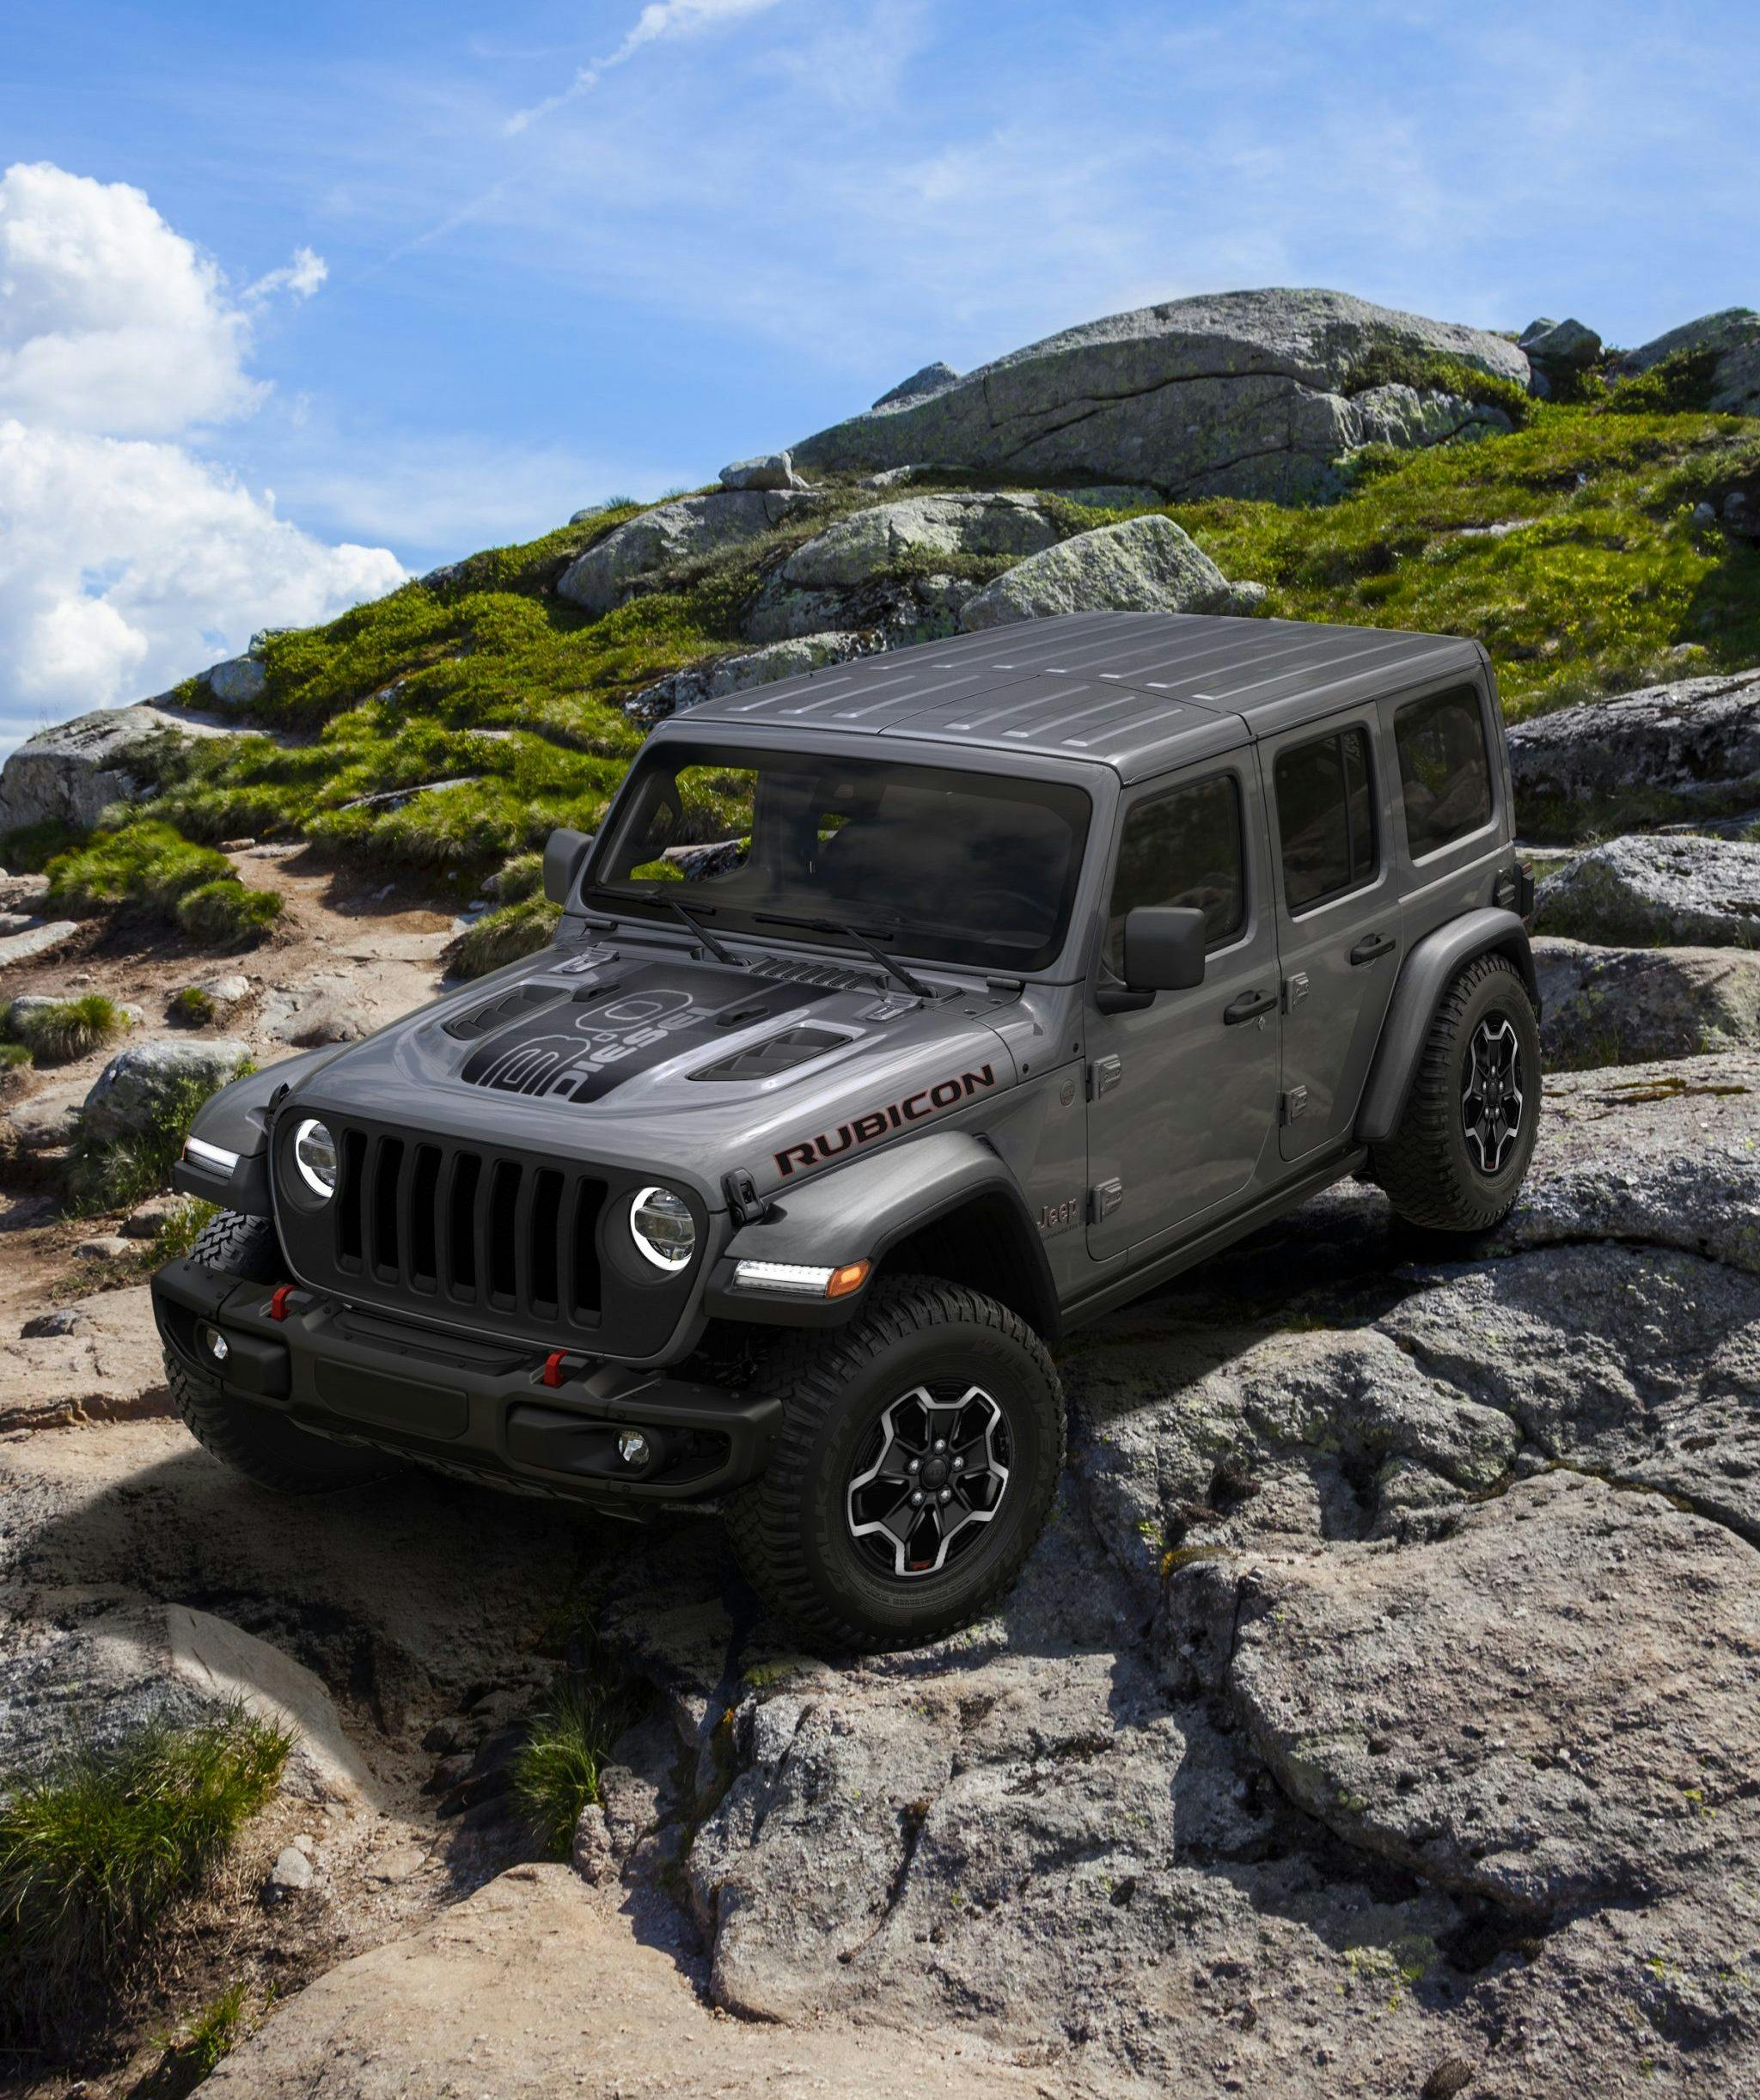 Goodbye, EcoDiesel Wrangler—signed, Rubicon FarOut - Hagerty Media